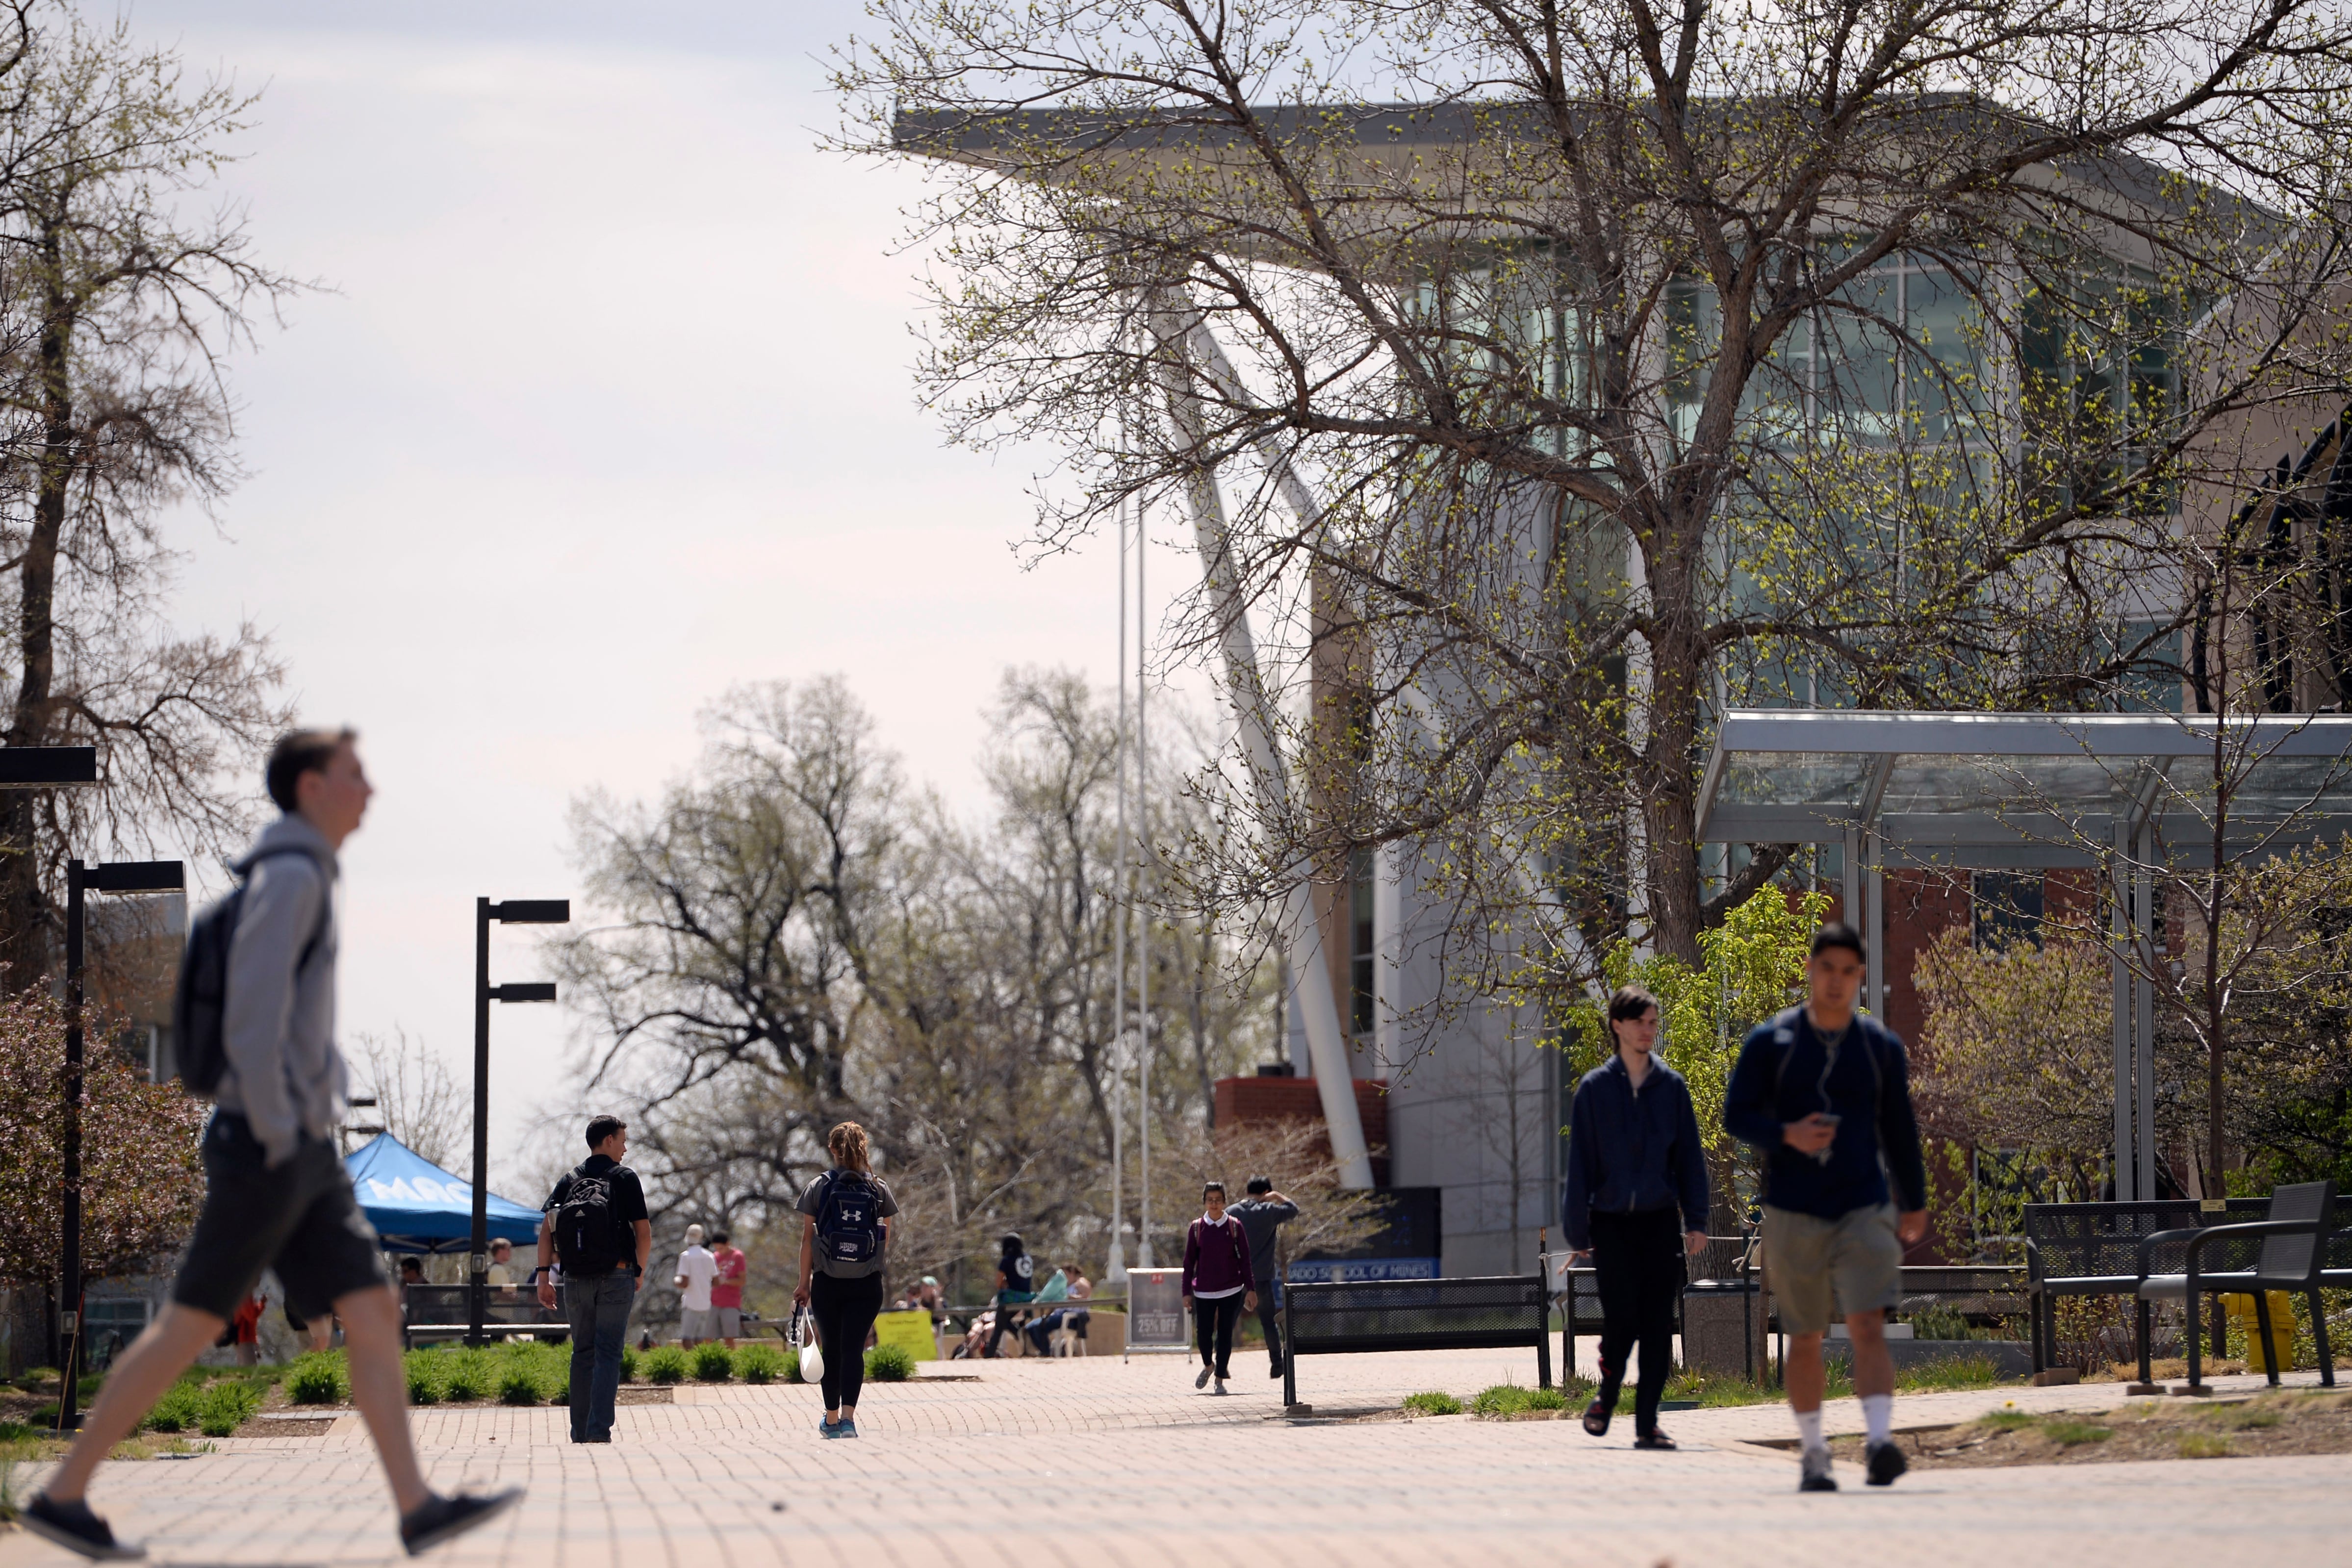 Students walk through a Colorado college campus, a large building with a flat roof looming in the background down the walkway.